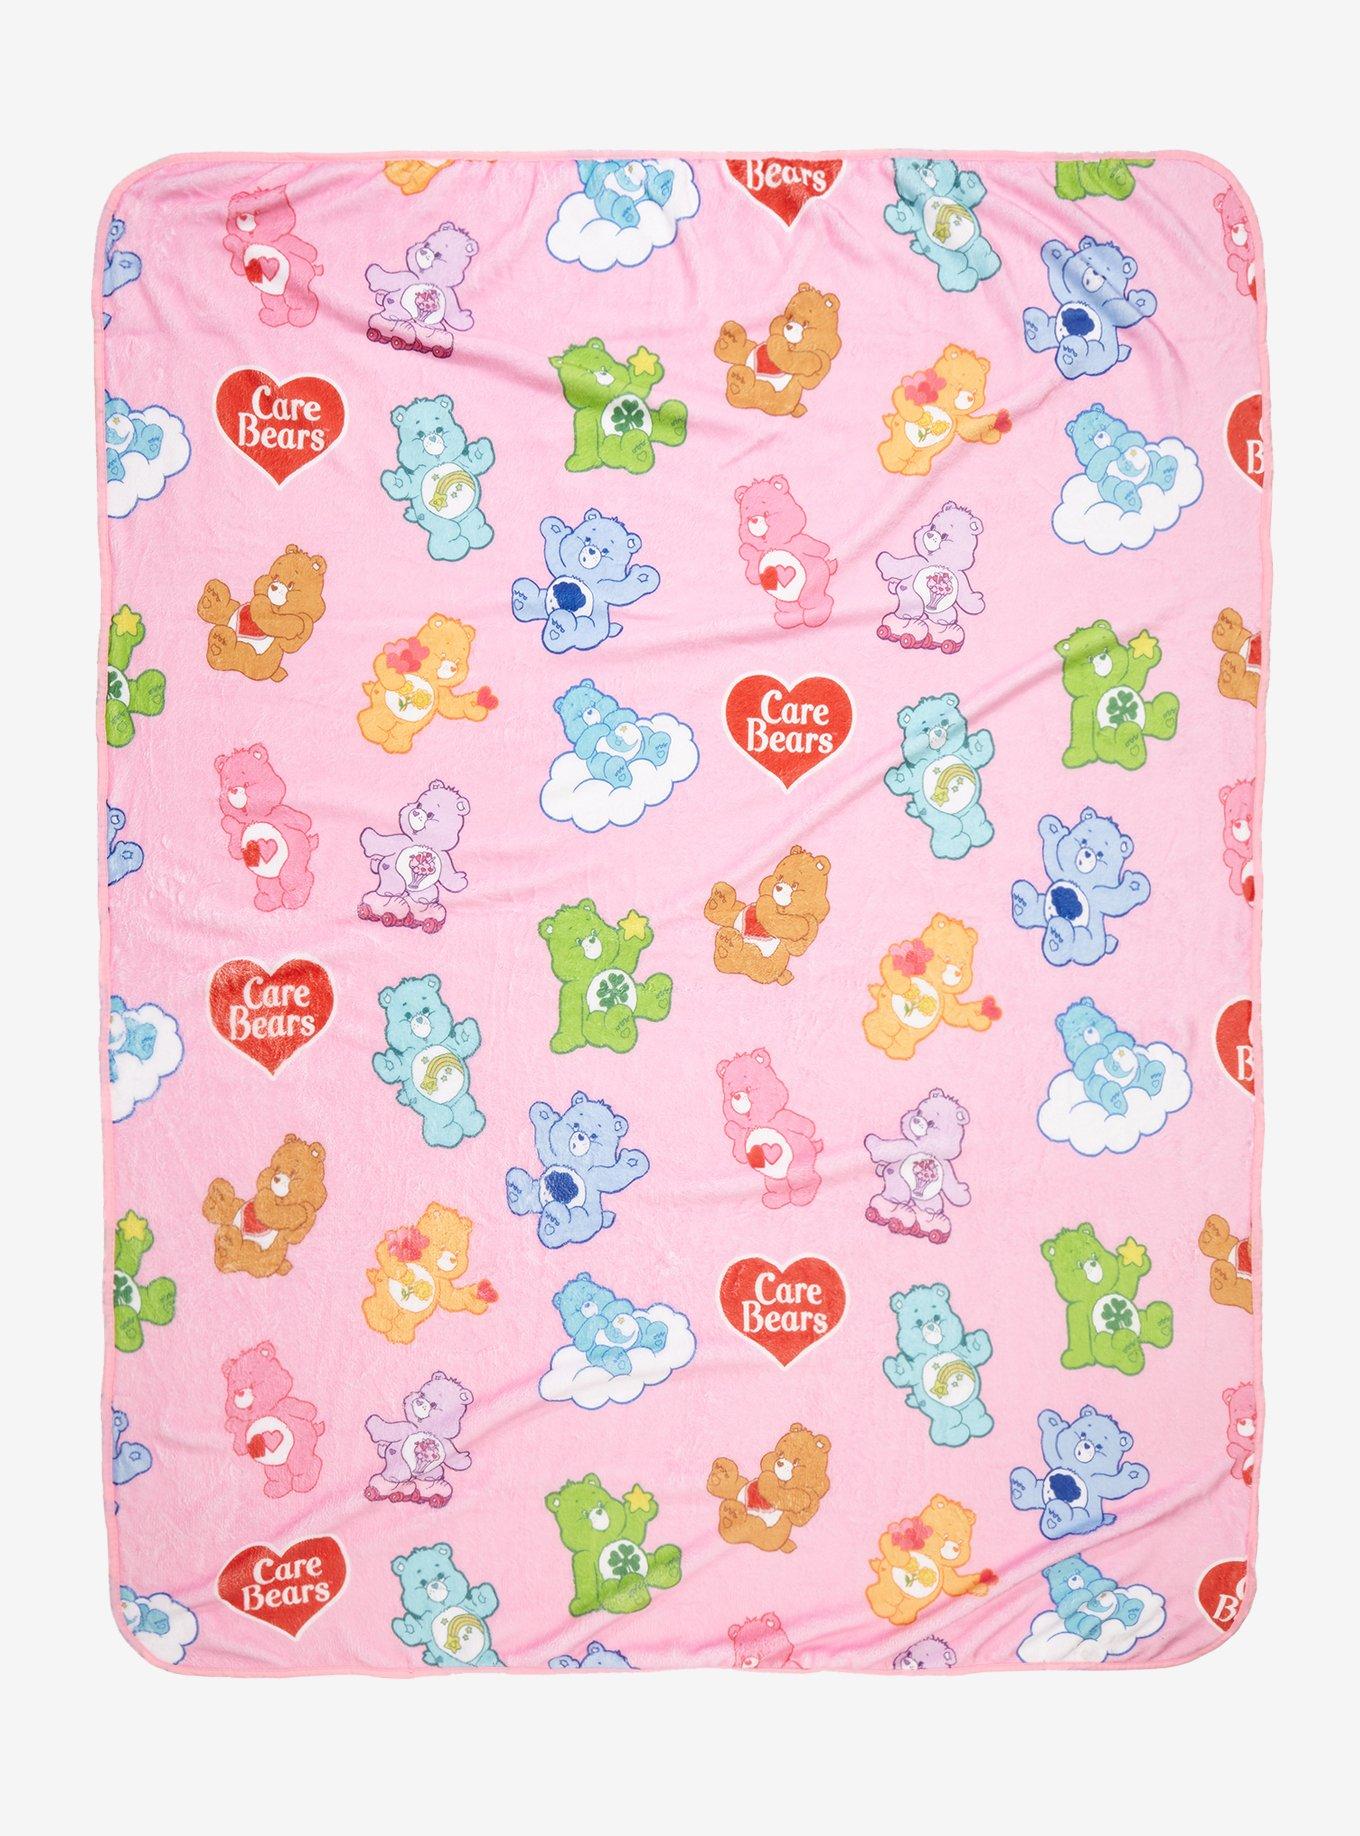 Care Bears baby cozy blanket with white hat and blanket new! 